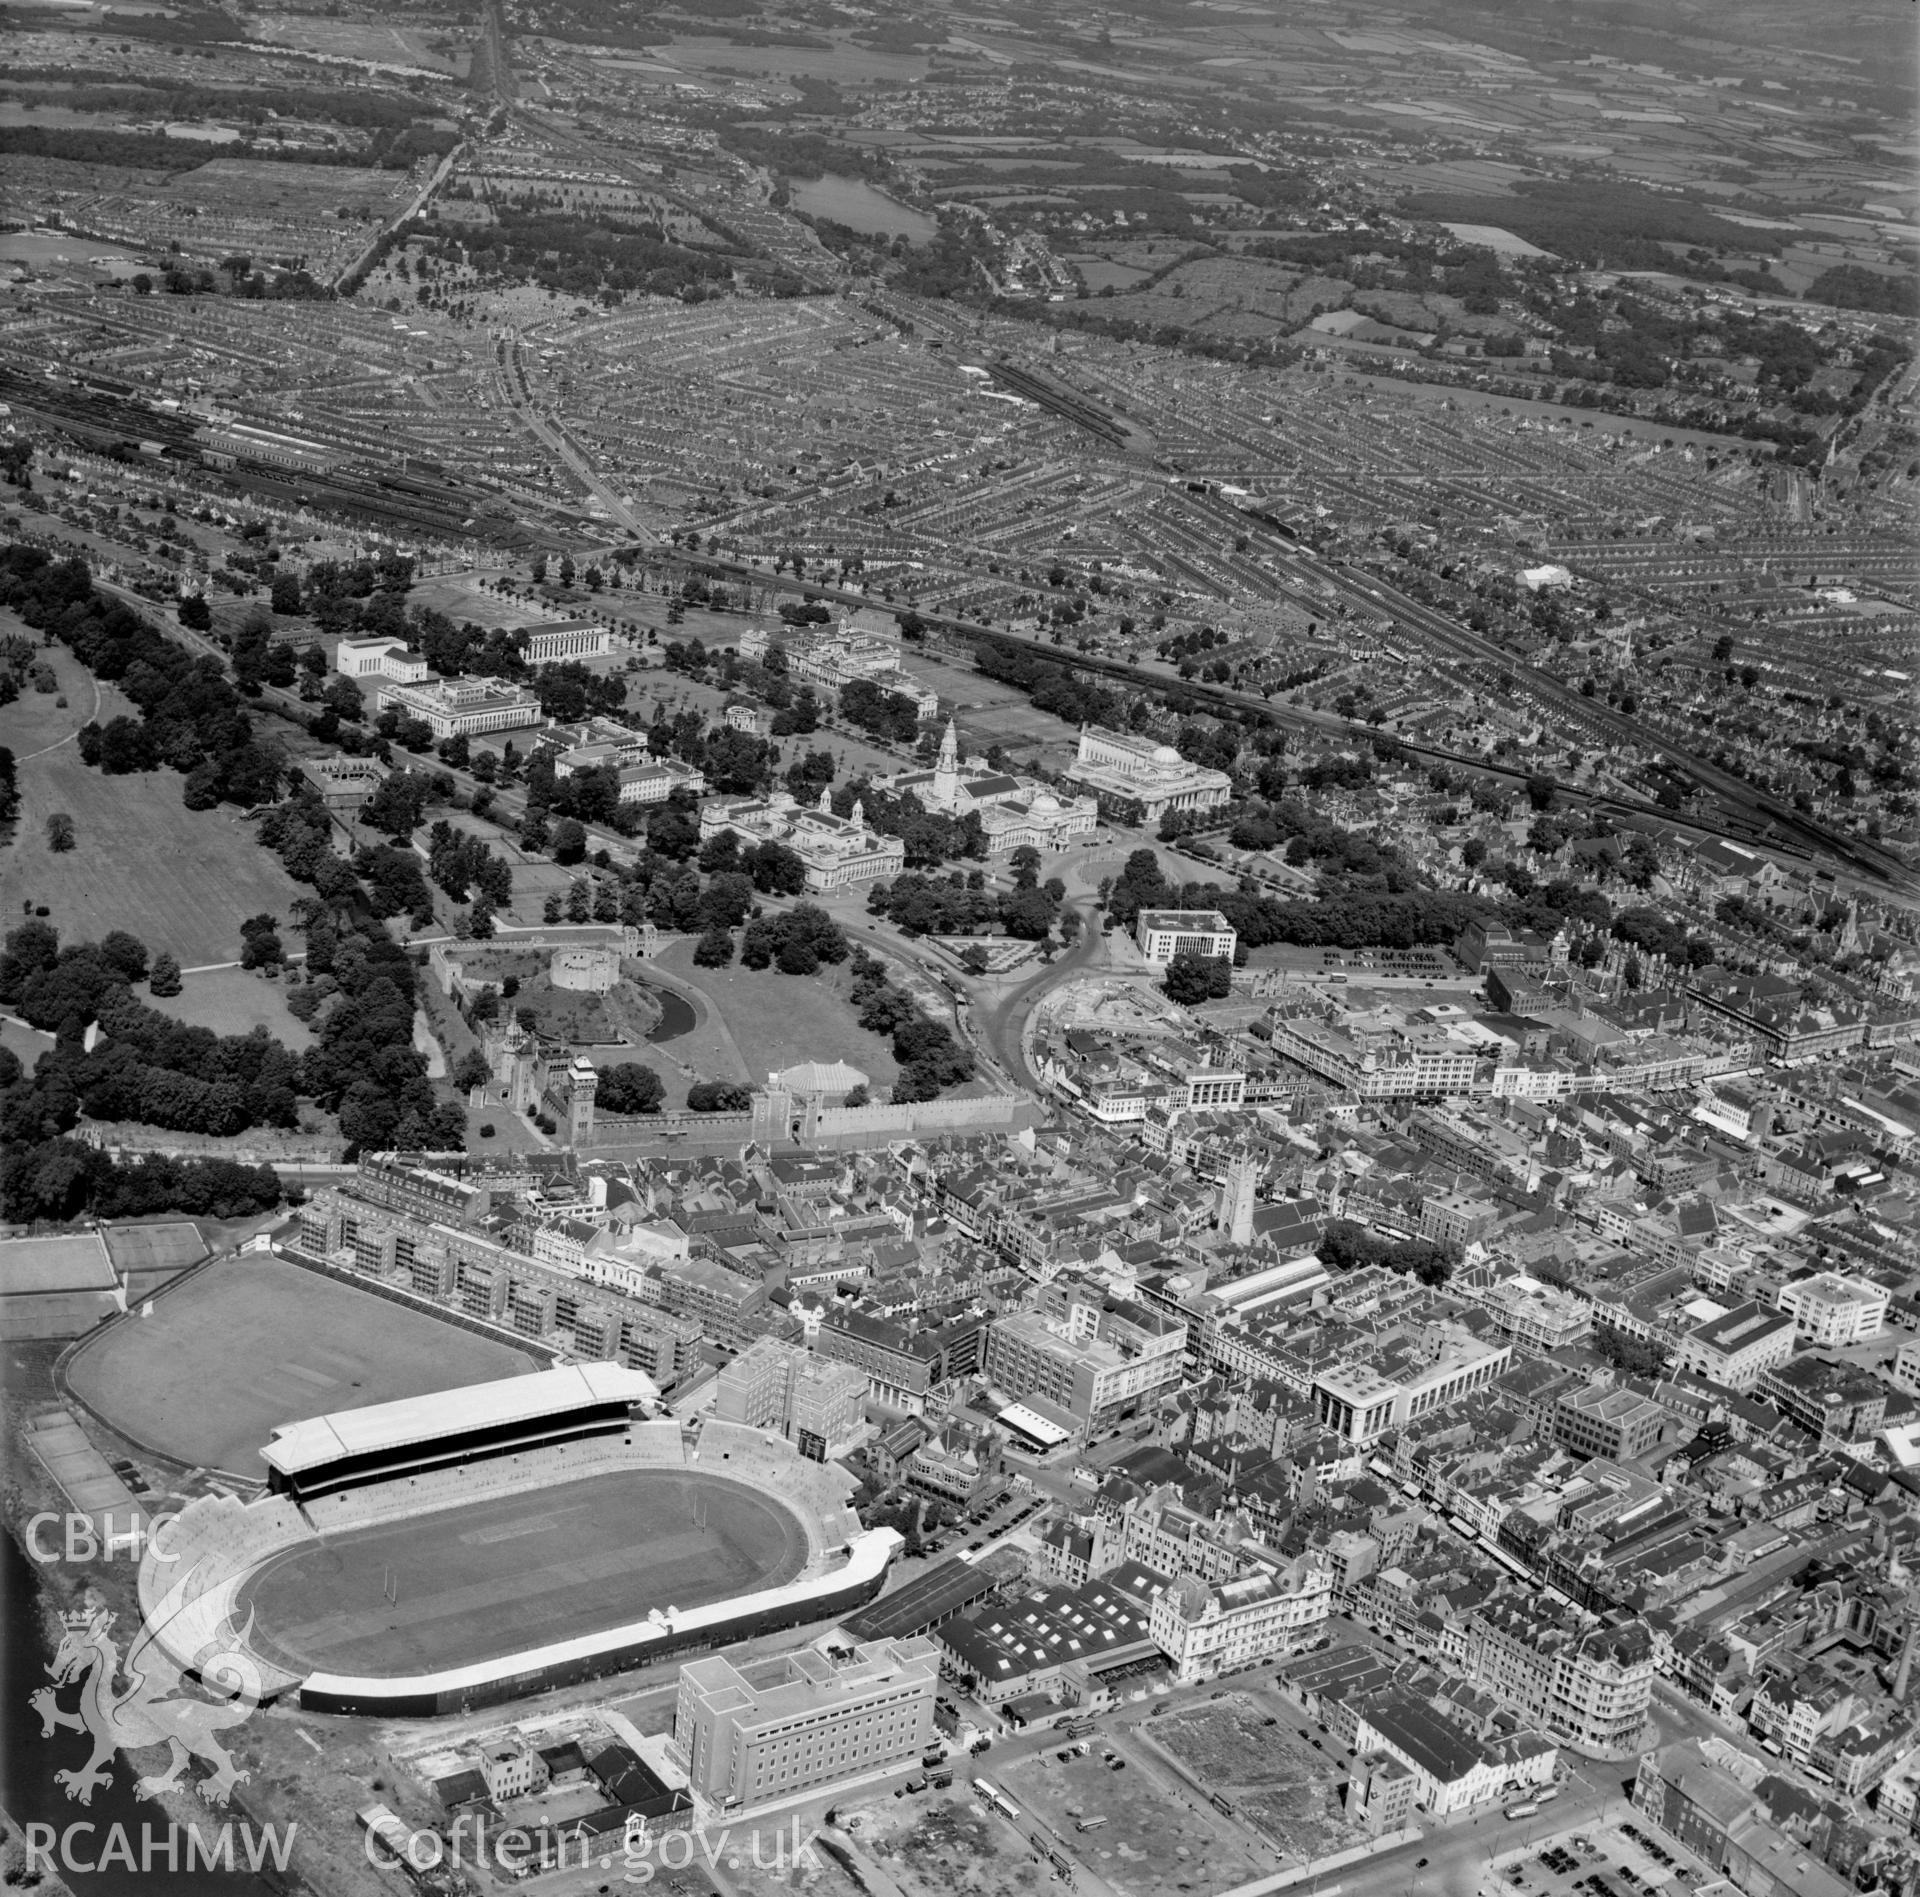 General view of Cardiff showing Arms Park